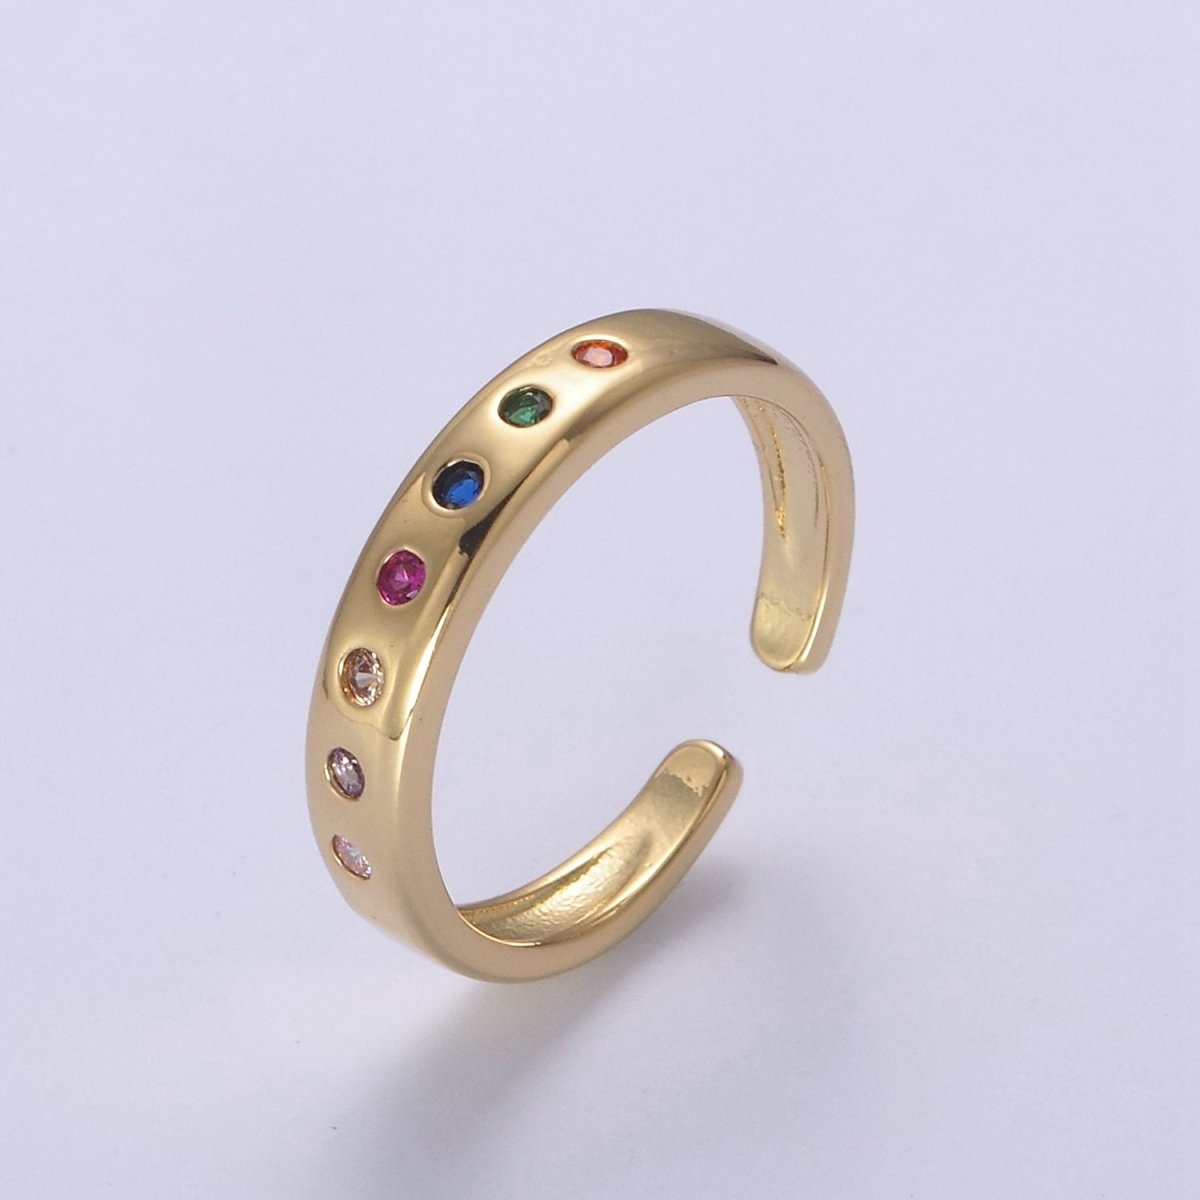 18K Gold Filled Round Micro Pave Ring,Multi-Color Zircon Round Ring,Minimalist Ring,Gold Open Ring,Adjustable Ring,Gift for Her U-515 ~ U-516 - DLUXCA